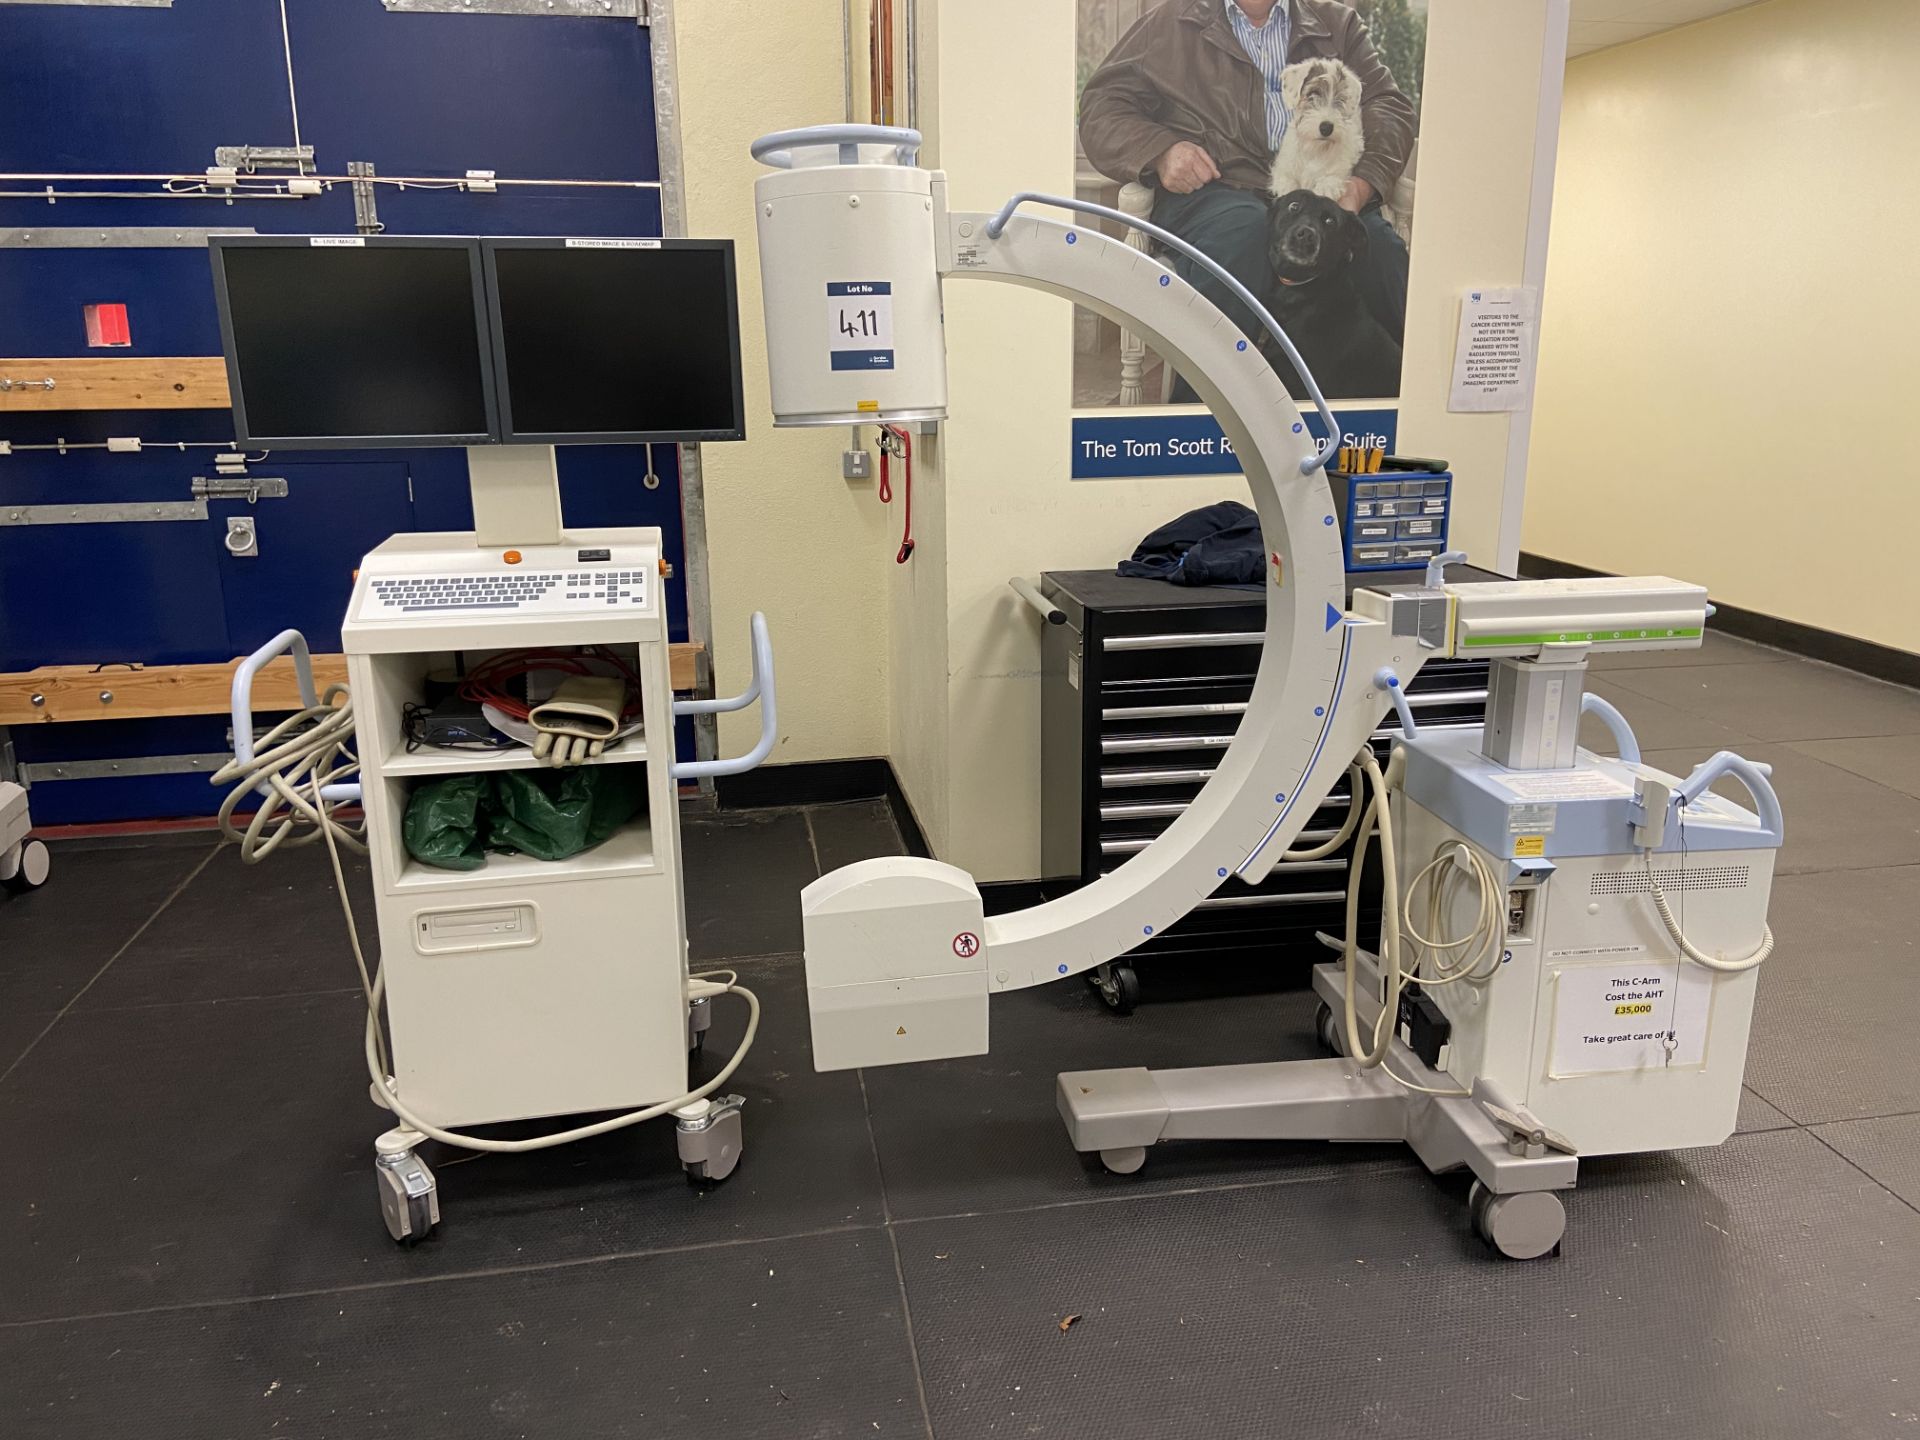 Siemens 'Siremobil Compact L' C arm mobile X-ray machine (2013) S/no 32280, with model 10397400